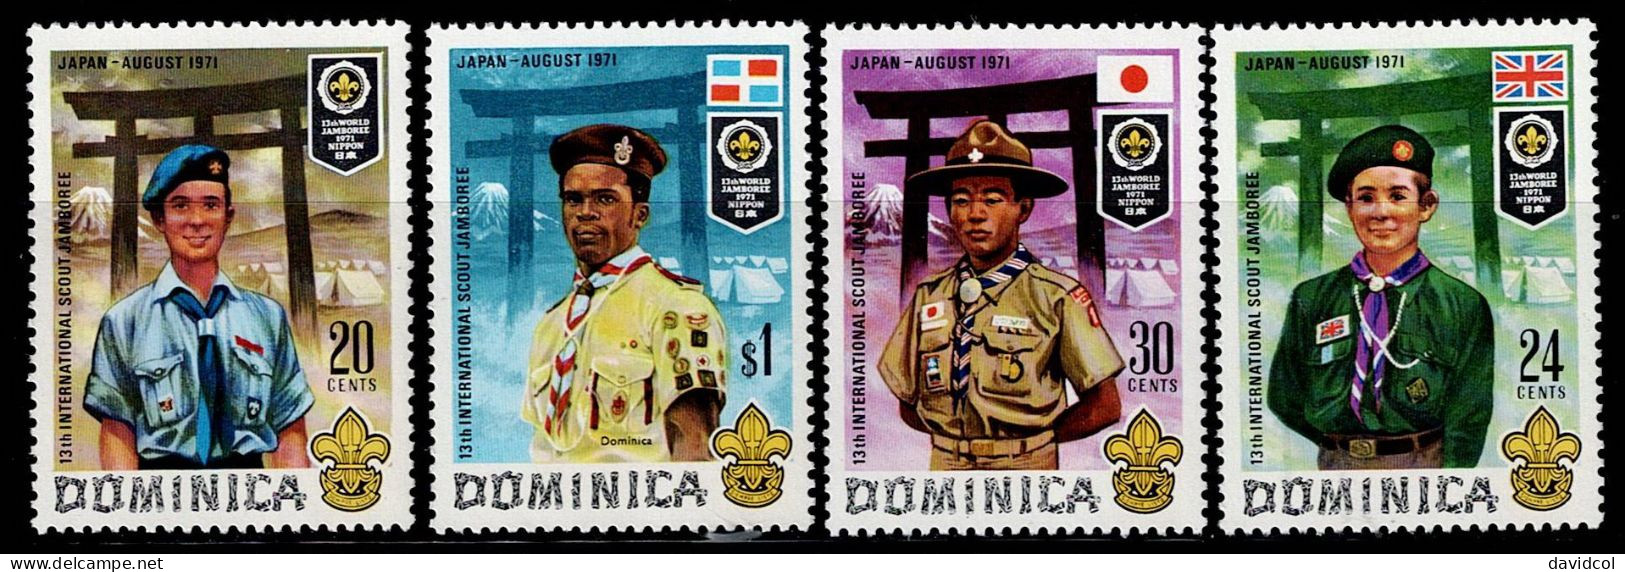 DOM-02- DOMINICA - 1971 - MNH -SCOUTS- WORLD SCOUT JAMBOREE JAPAN - Dominica (...-1978)